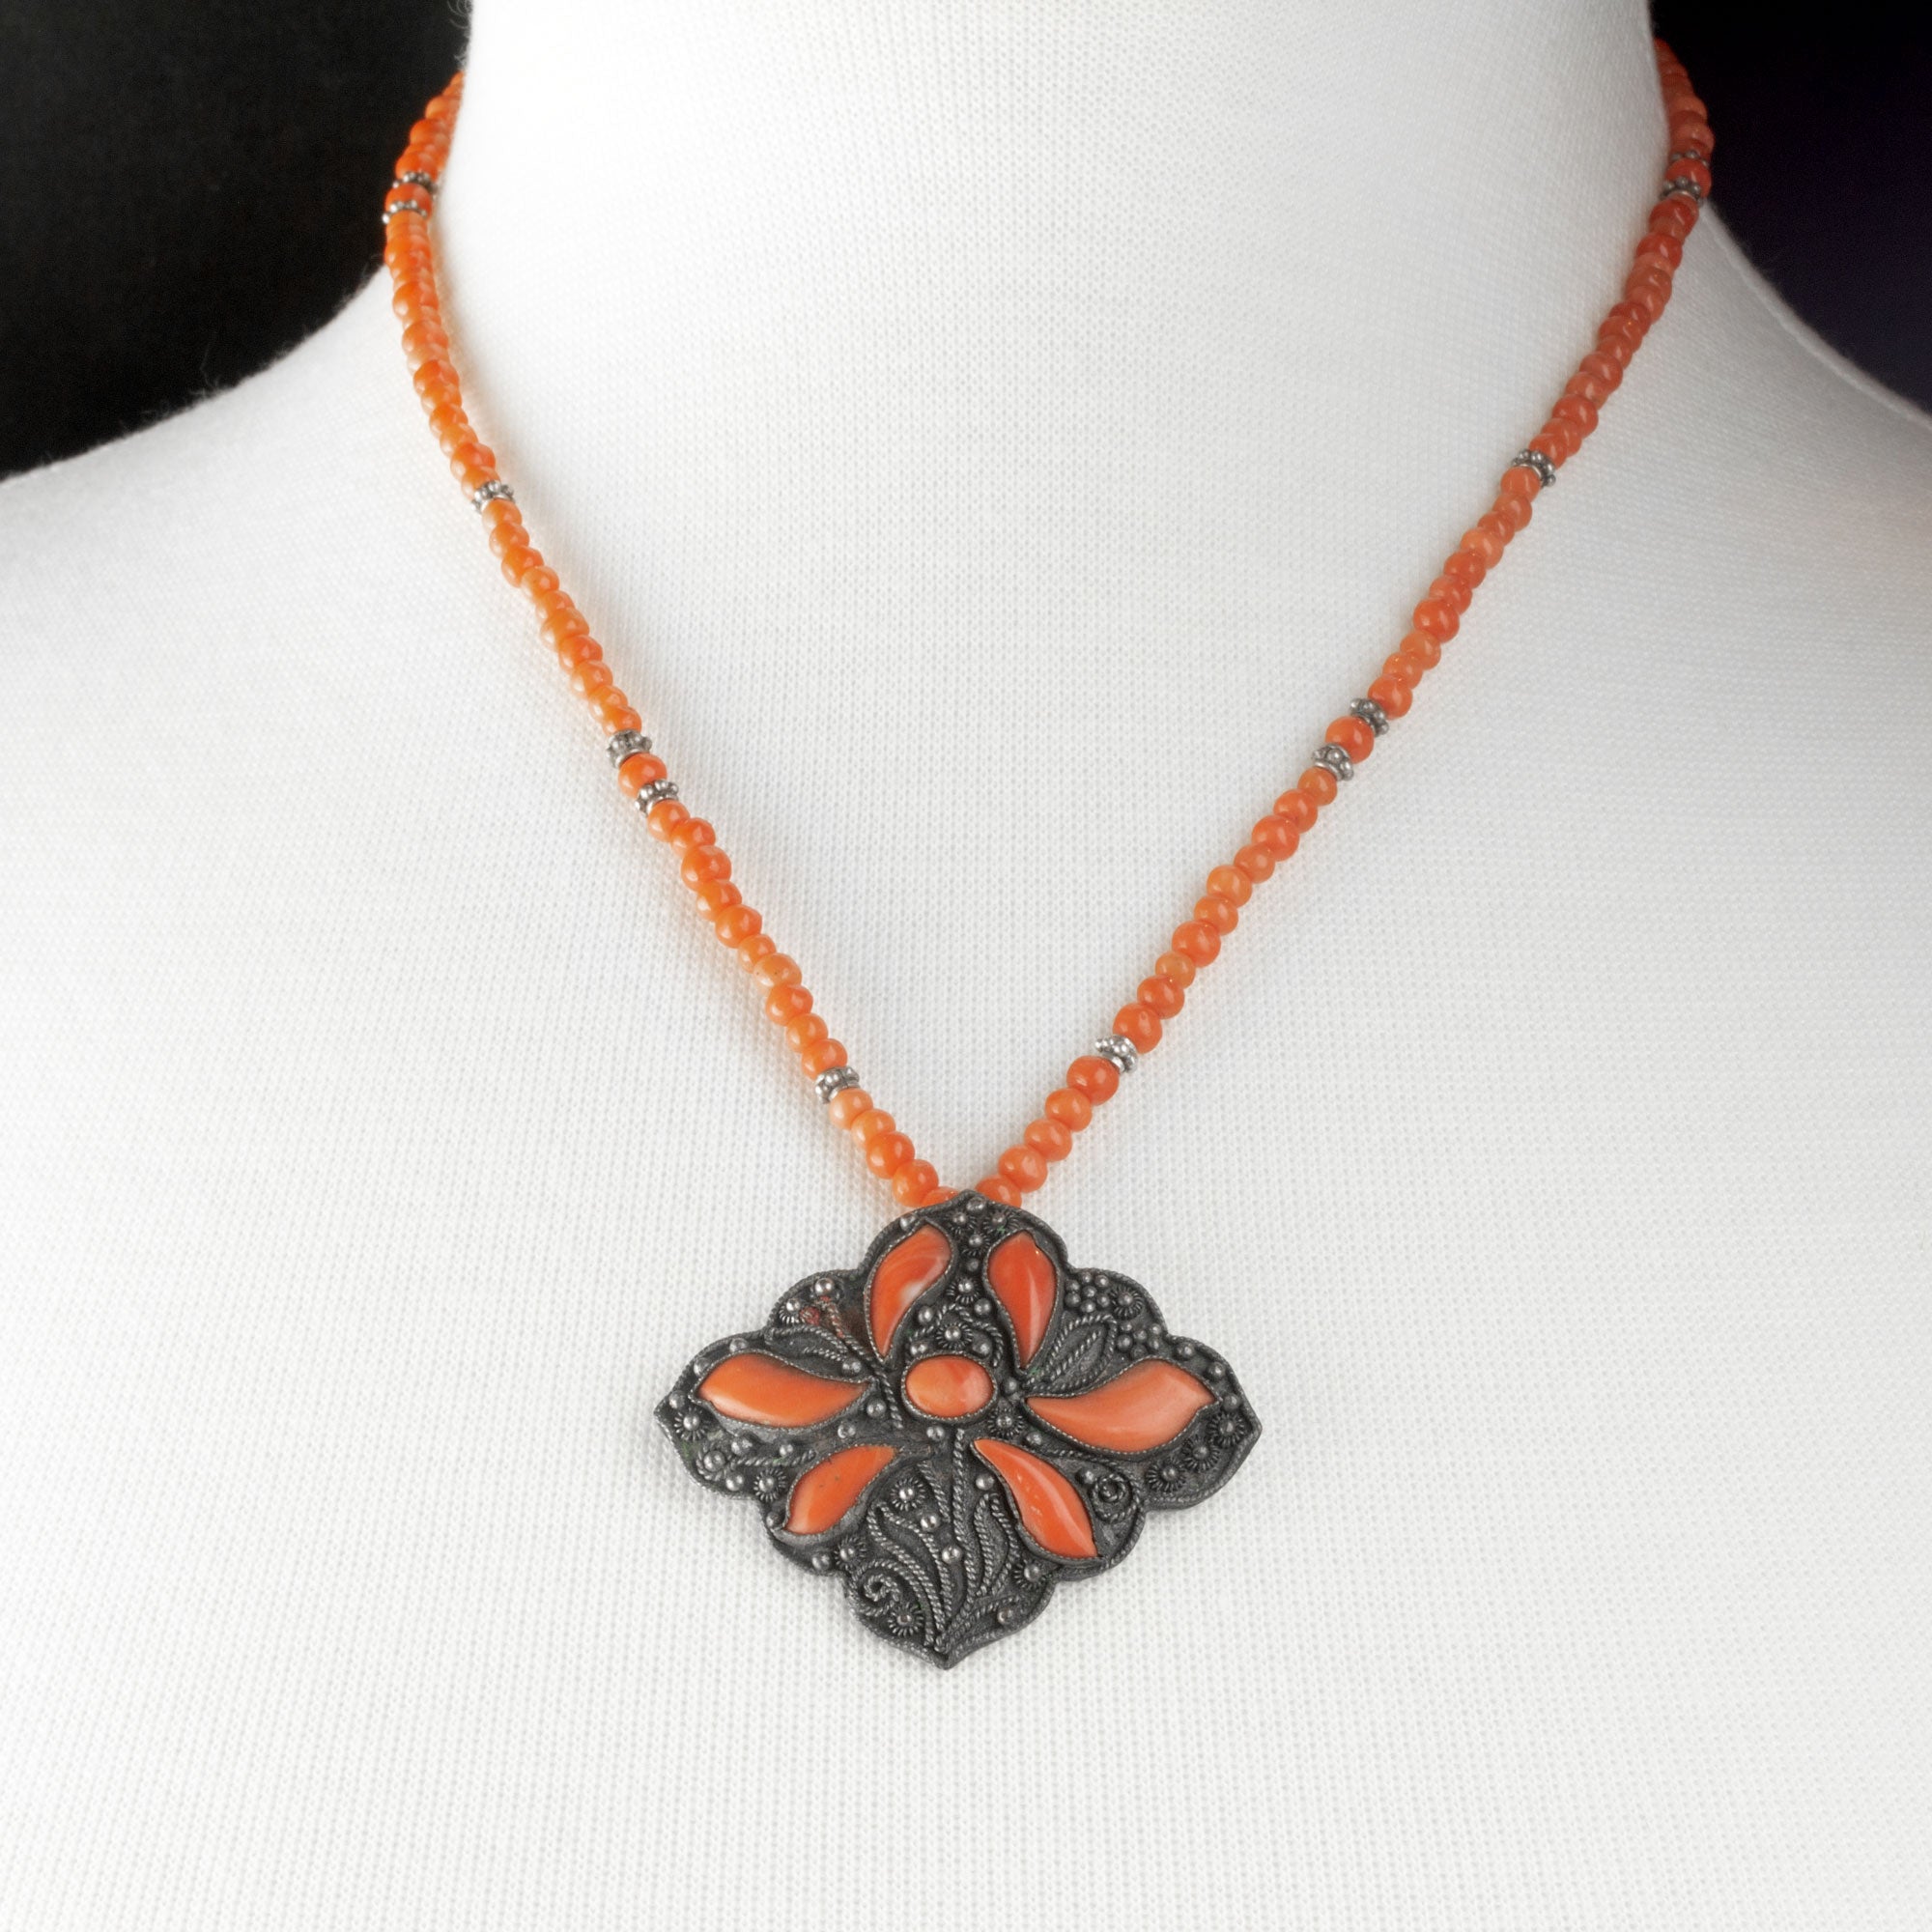 Mediterranean Coral Necklace with coral pendant, 18 inches. j-nlja917 –  Earthly Adornments